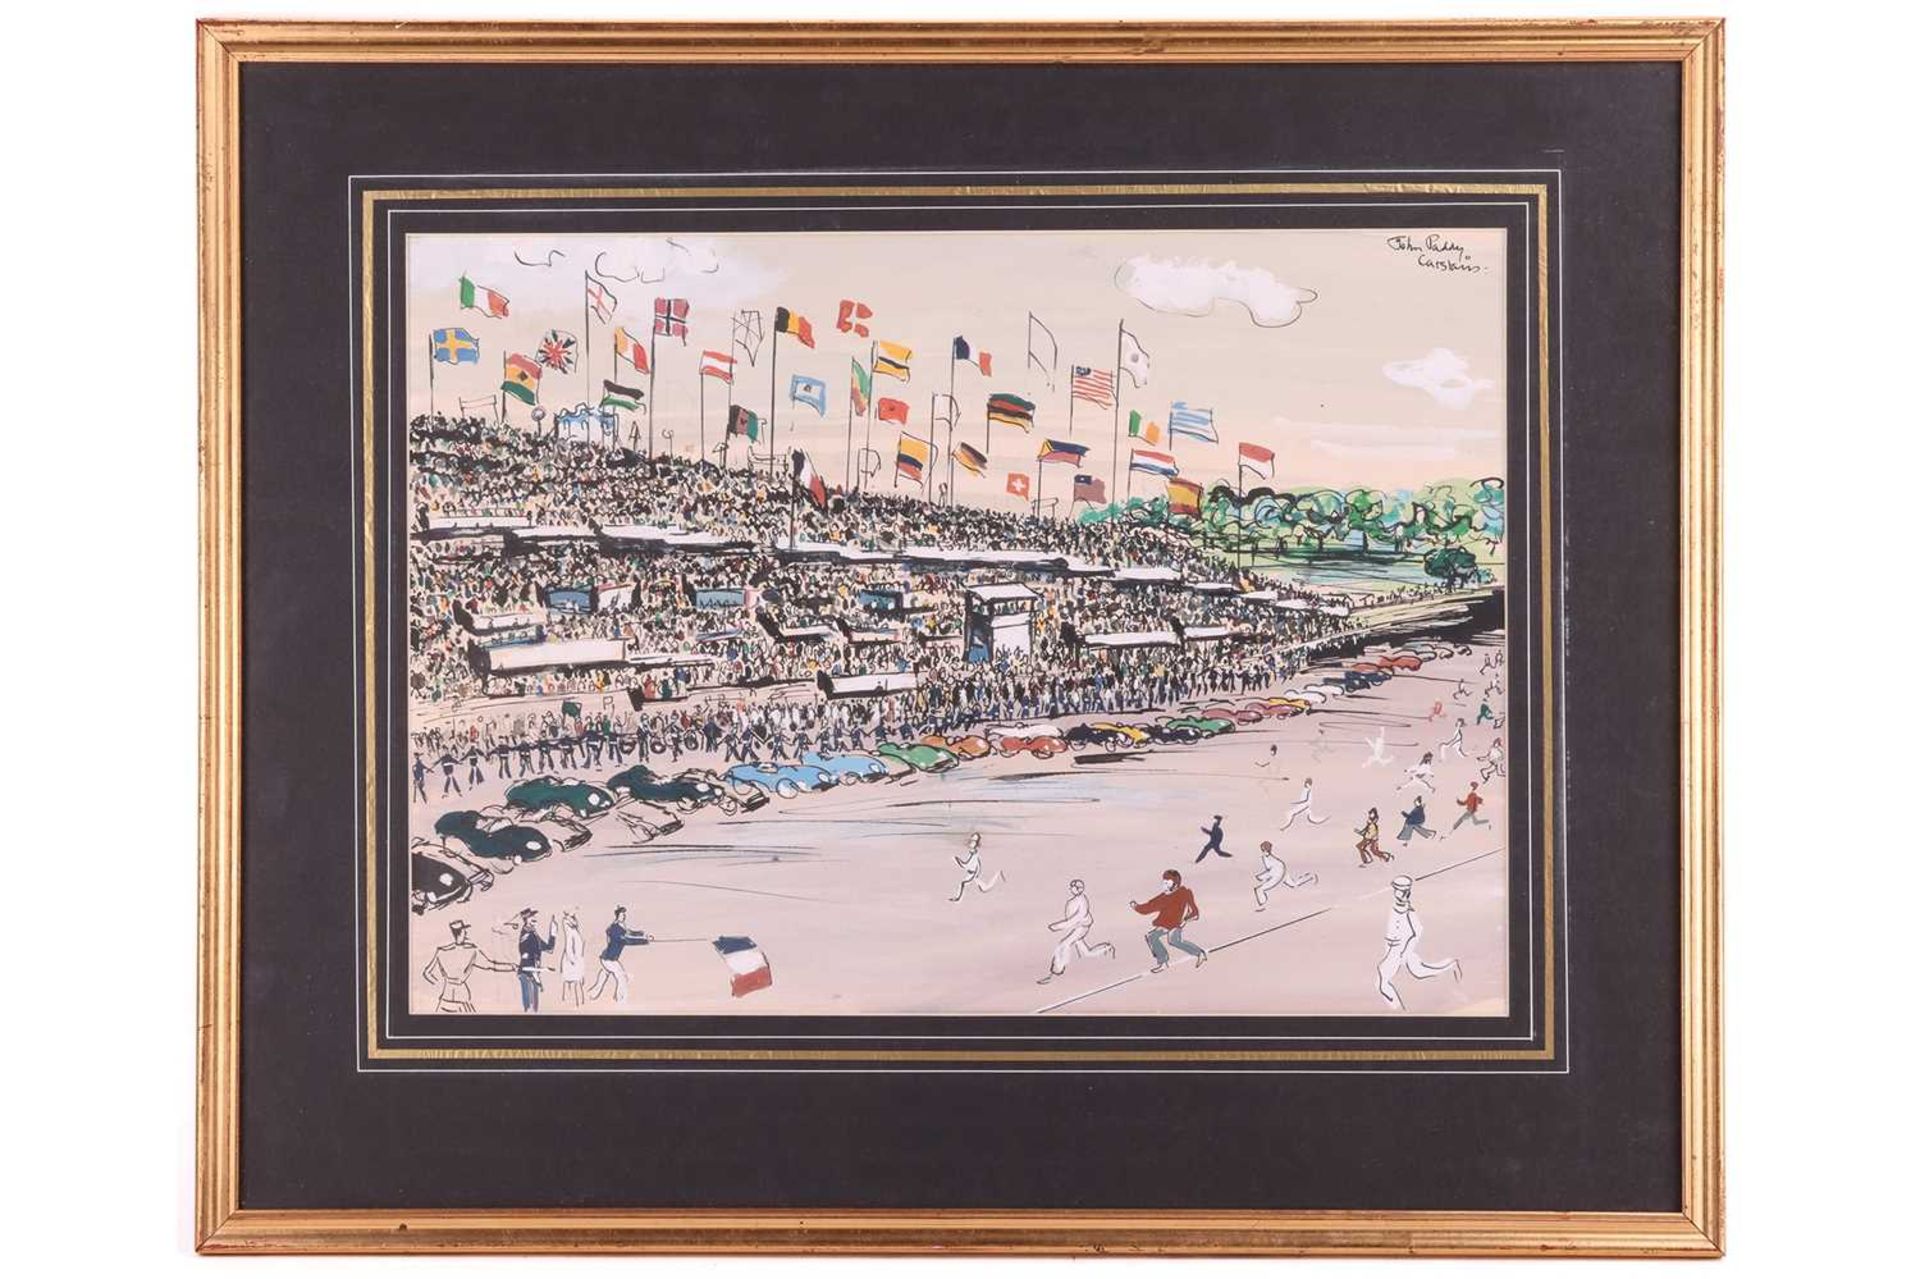 John Paddy Carstairs (1916 - 1970), 'Le Mans - The Start of the Race', signed 'John Paddy Carstairs'